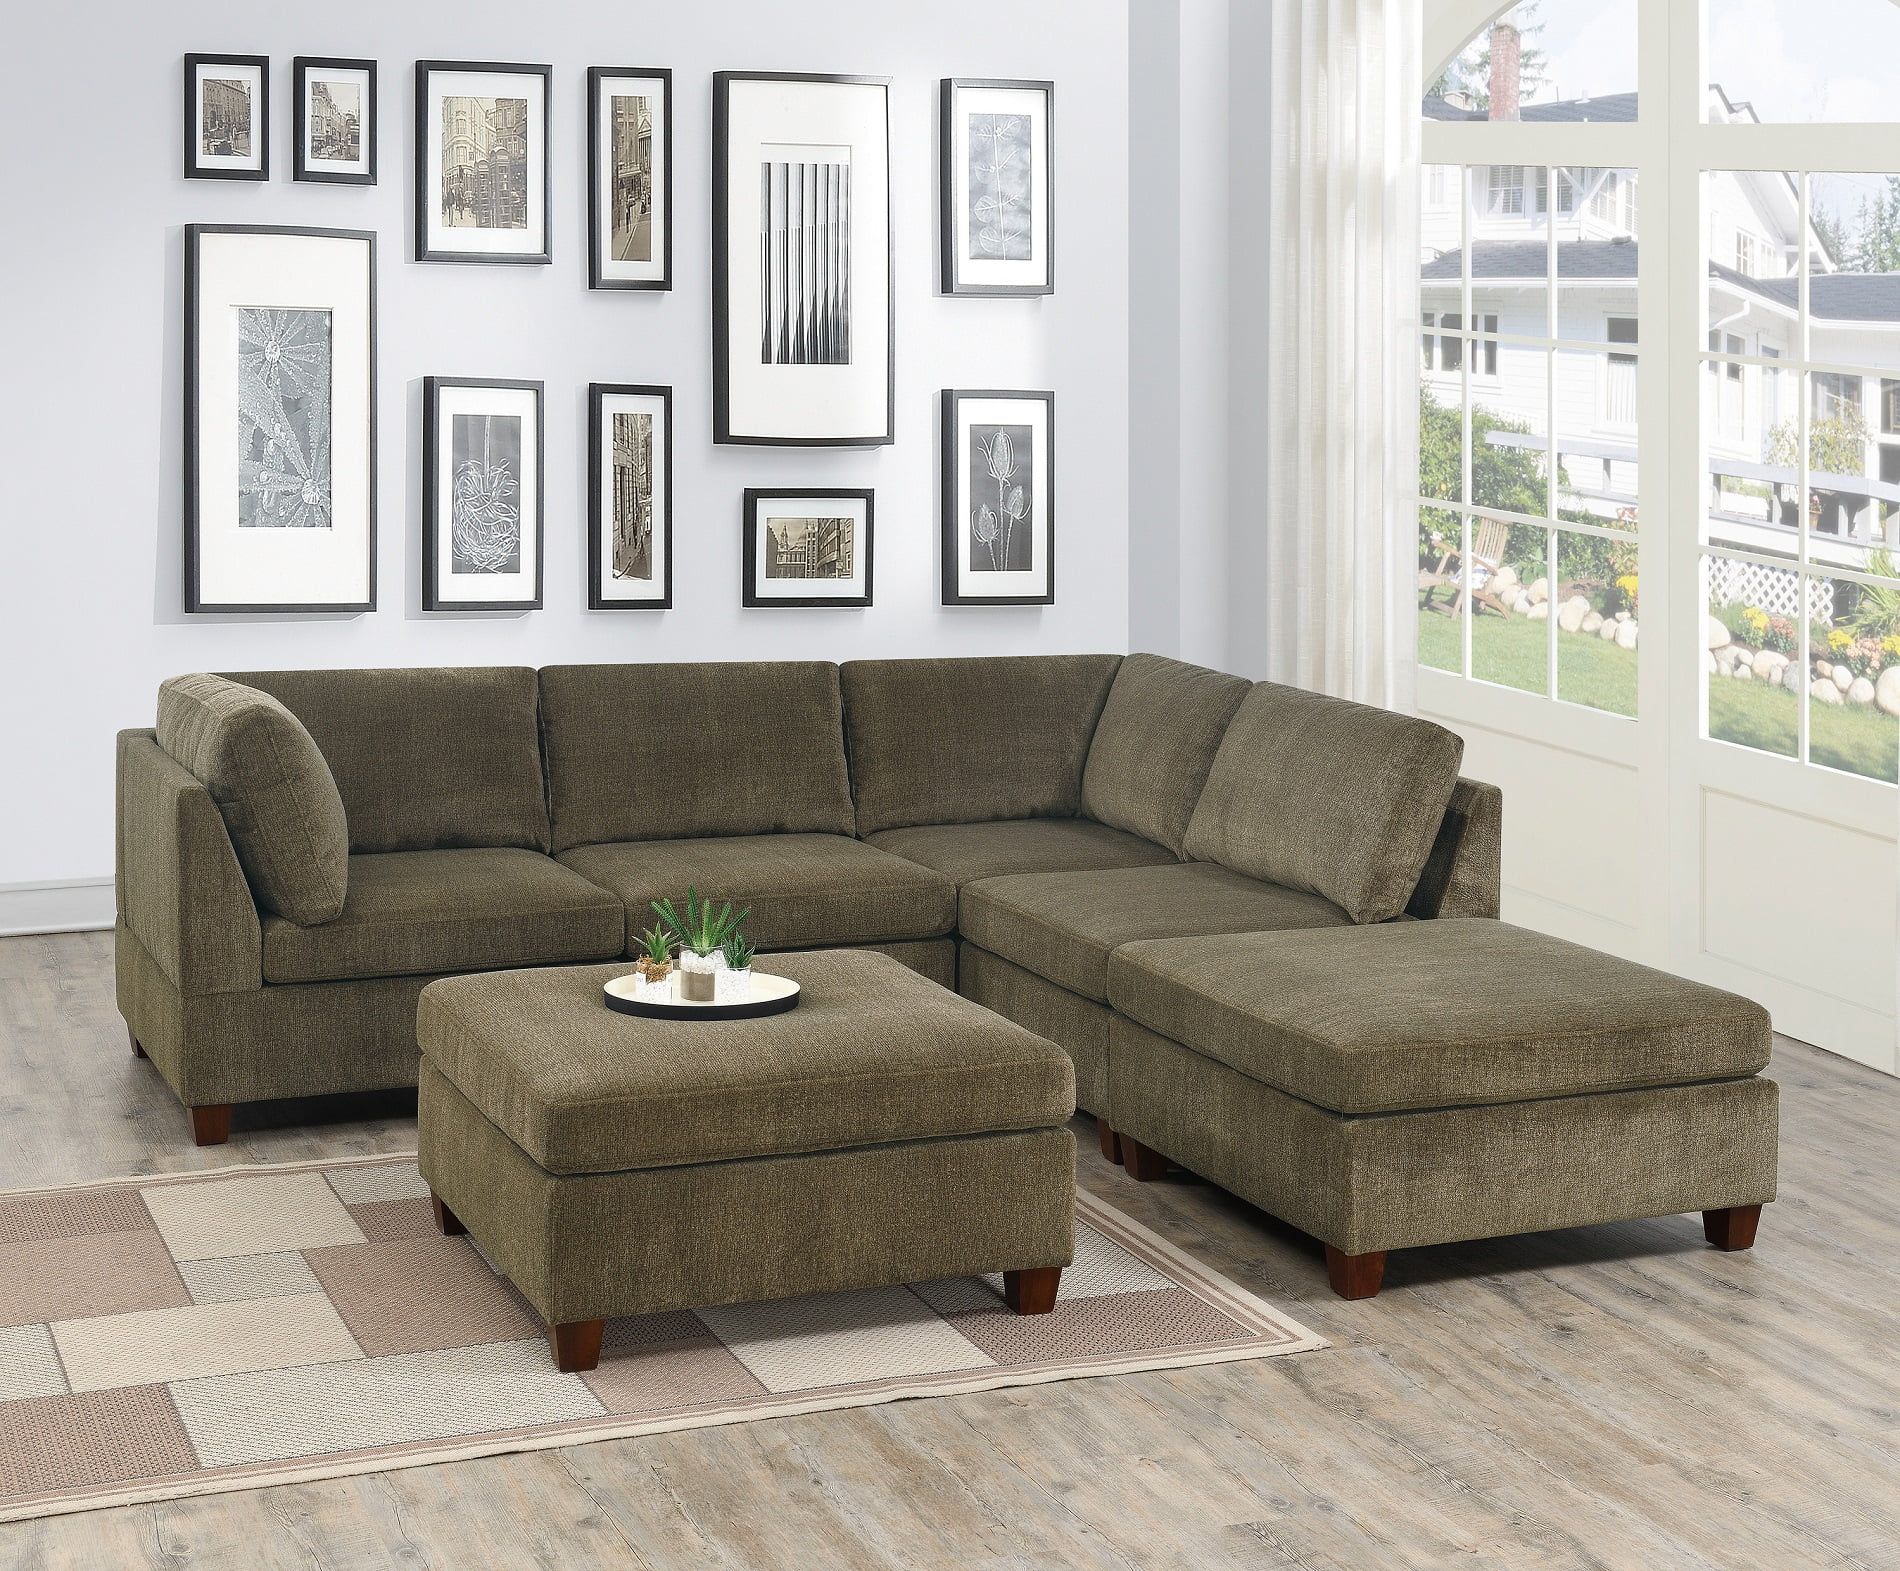 Contemporary Modern Unique Modular 6pc Sectional Sofa Set Tan Color Inside Chenille Sectional Sofas (View 6 of 20)